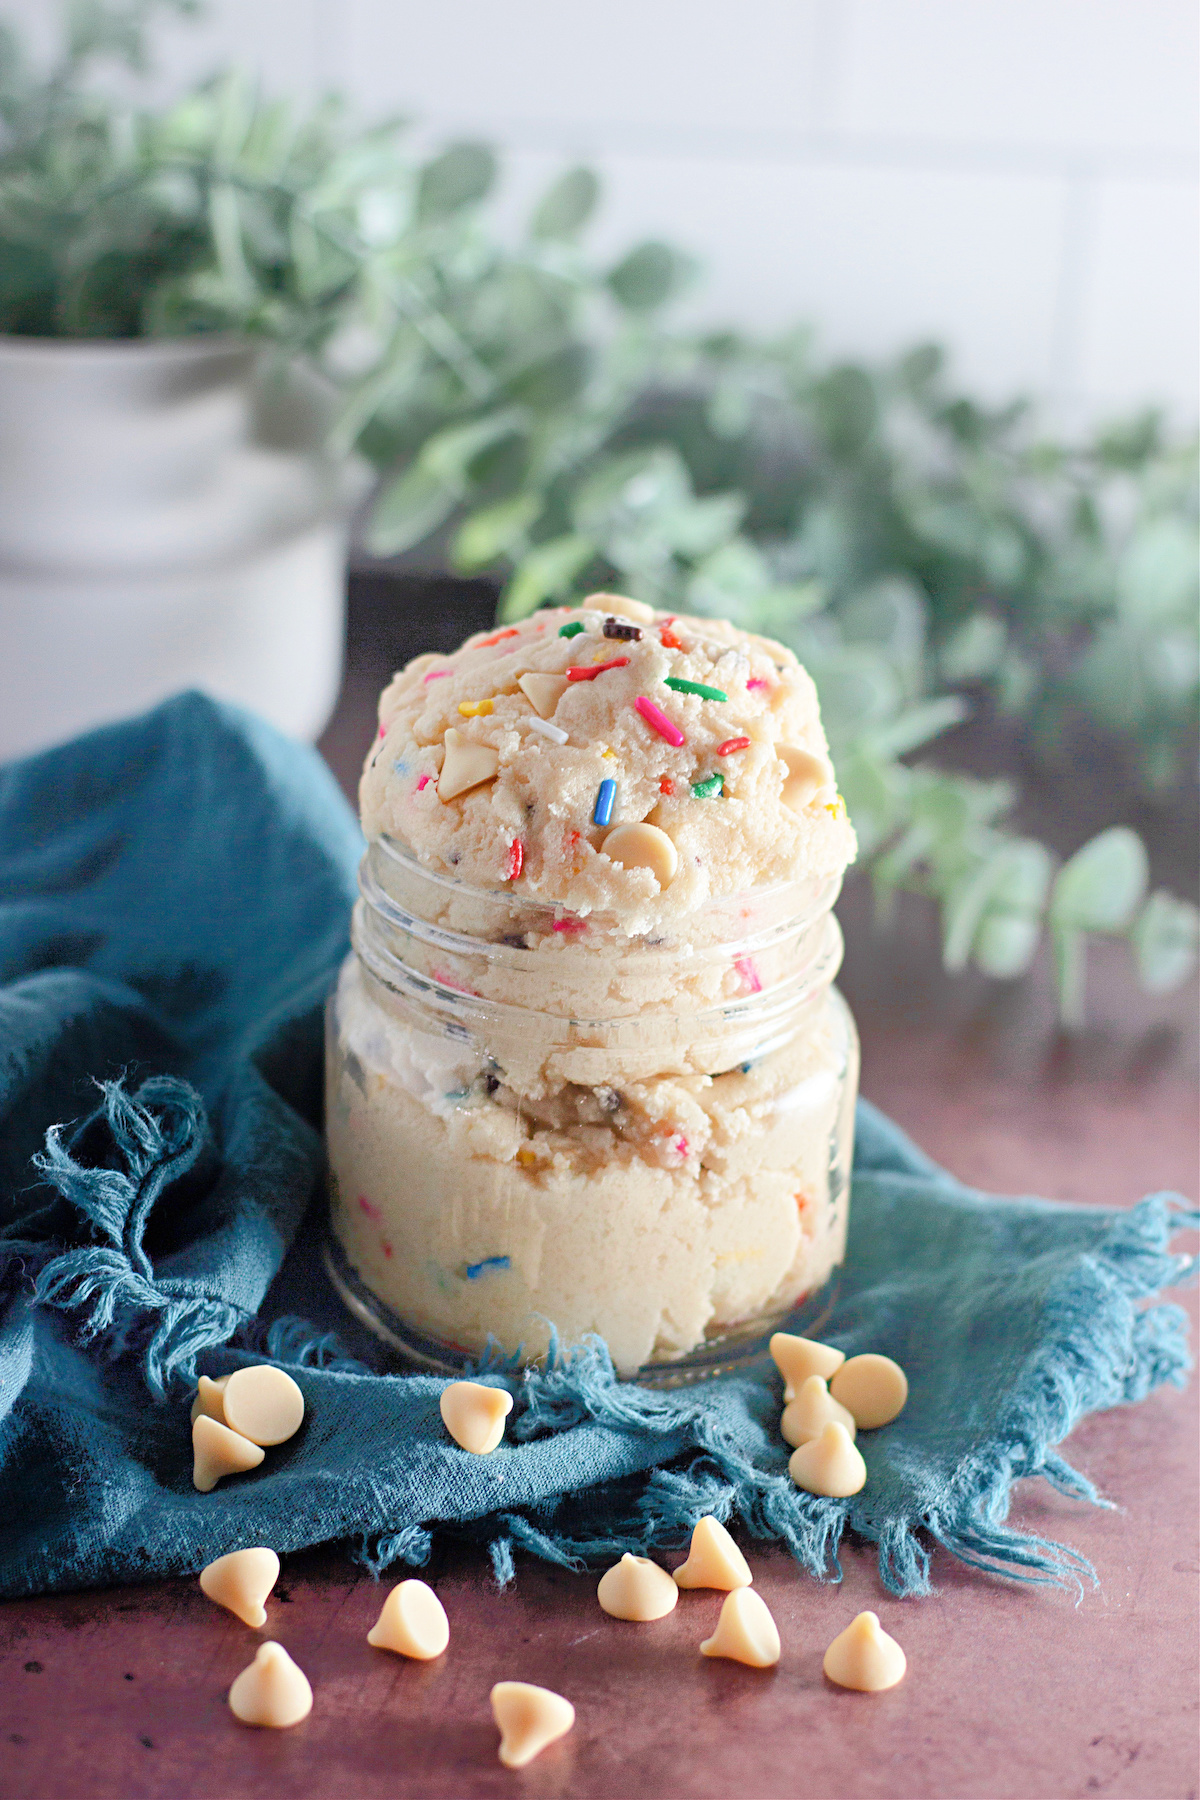 It's no secret that many of us find it irresistible to sample the cookie dough while baking. An eggless dough that can be safely consumed straight from the bowl is a brilliant alternative. This delightful sugar cookie dough is both scrumptious and hassle-free, making it a perfect treat. ​